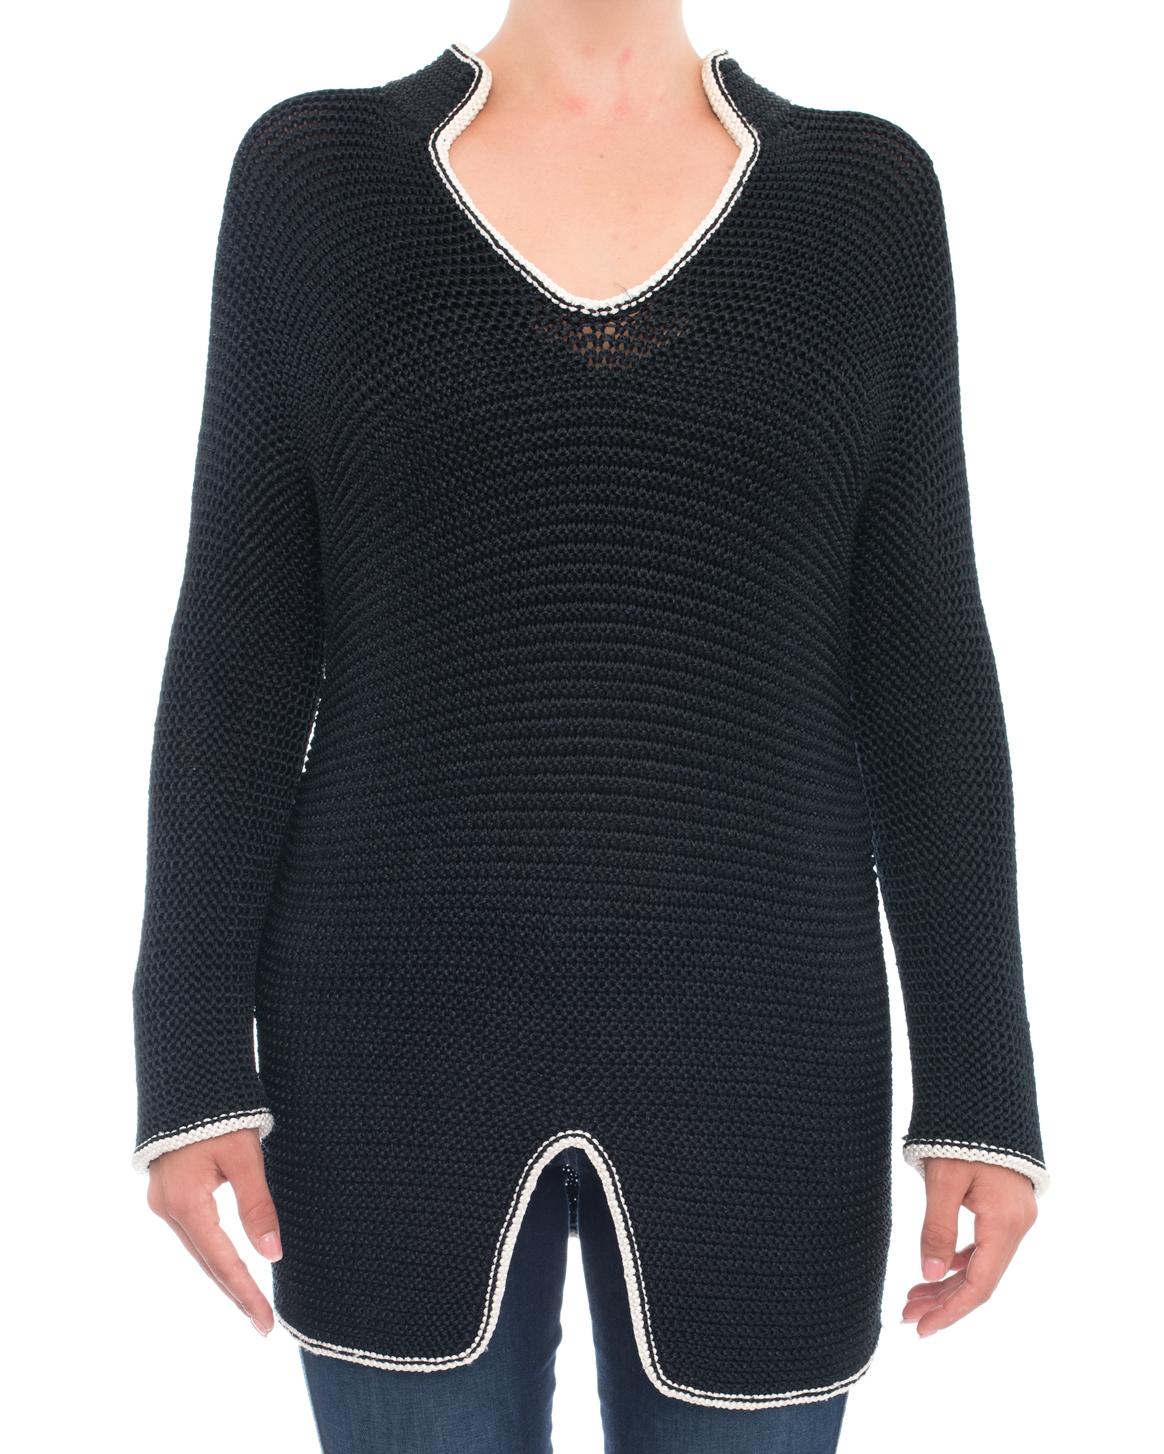 Chanel 08P Navy Knit Sweater Dress / Top with White Trim.  Slinky draped knit long sleeve top.  Pullover design with v-neckline and inverted v at front hem.  Shown worn as a dress on the Chanel Spring 2008 runway as pictured.  Will fit size FR38